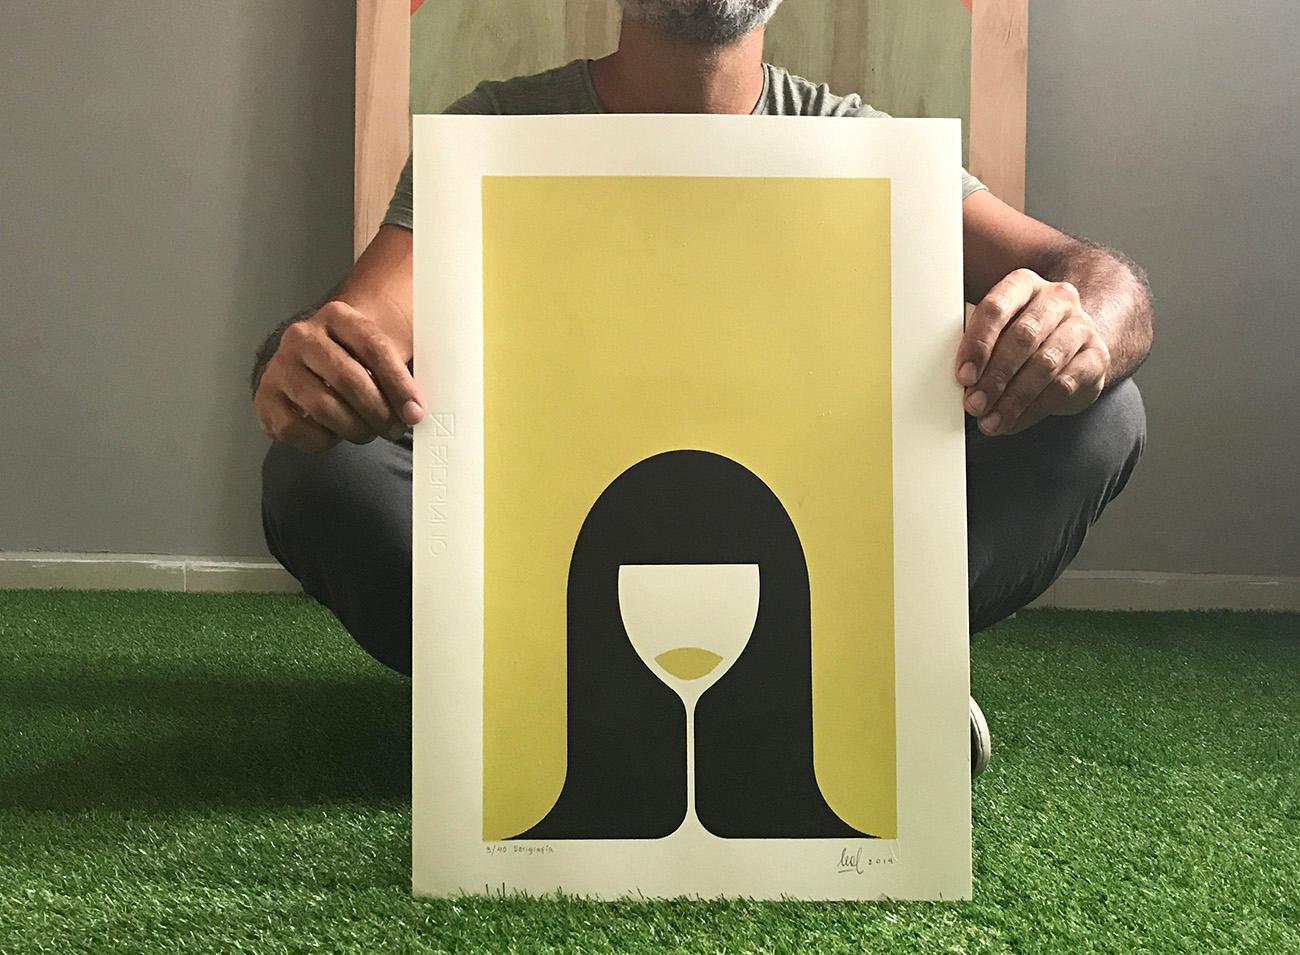 White Wine - Print by Guillermo Leal